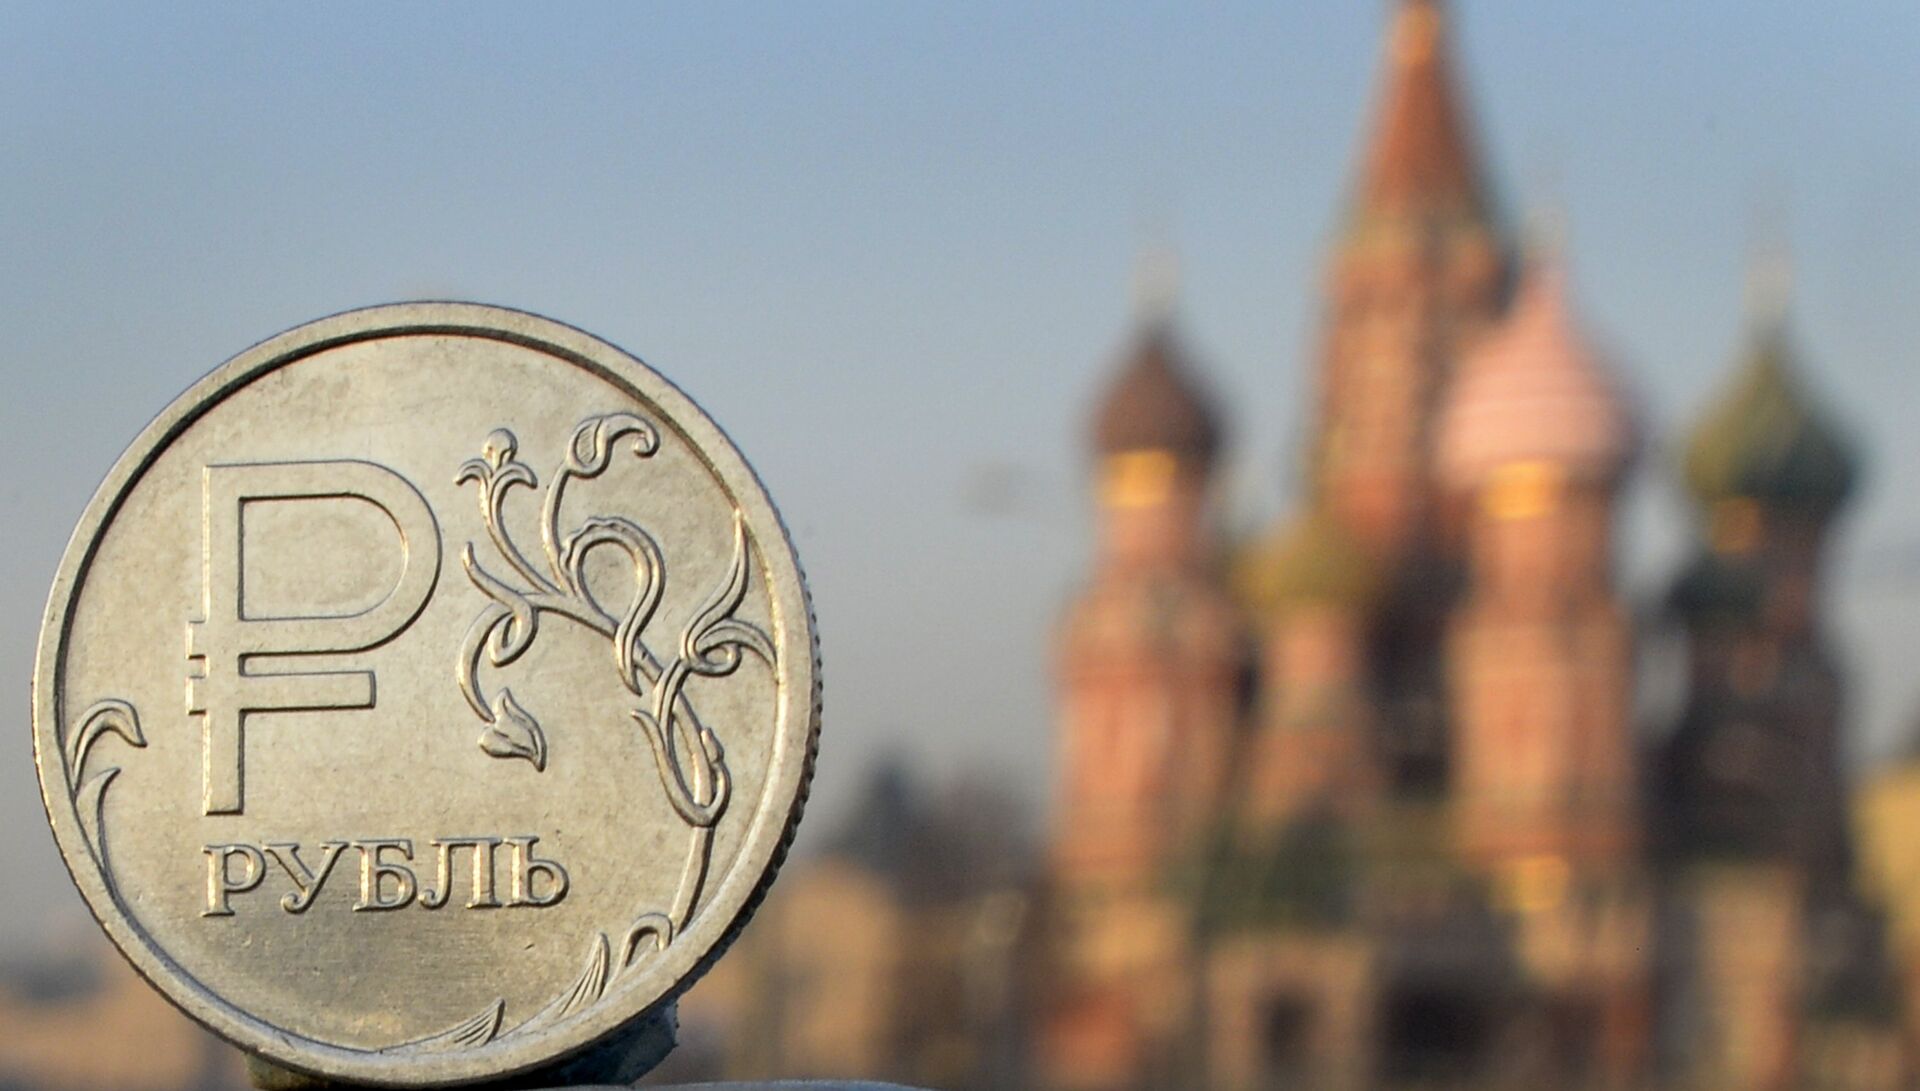 A Russian ruble coin is pictured in front of St. Basil cathedral in central Moscow - Sputnik International, 1920, 29.11.2022